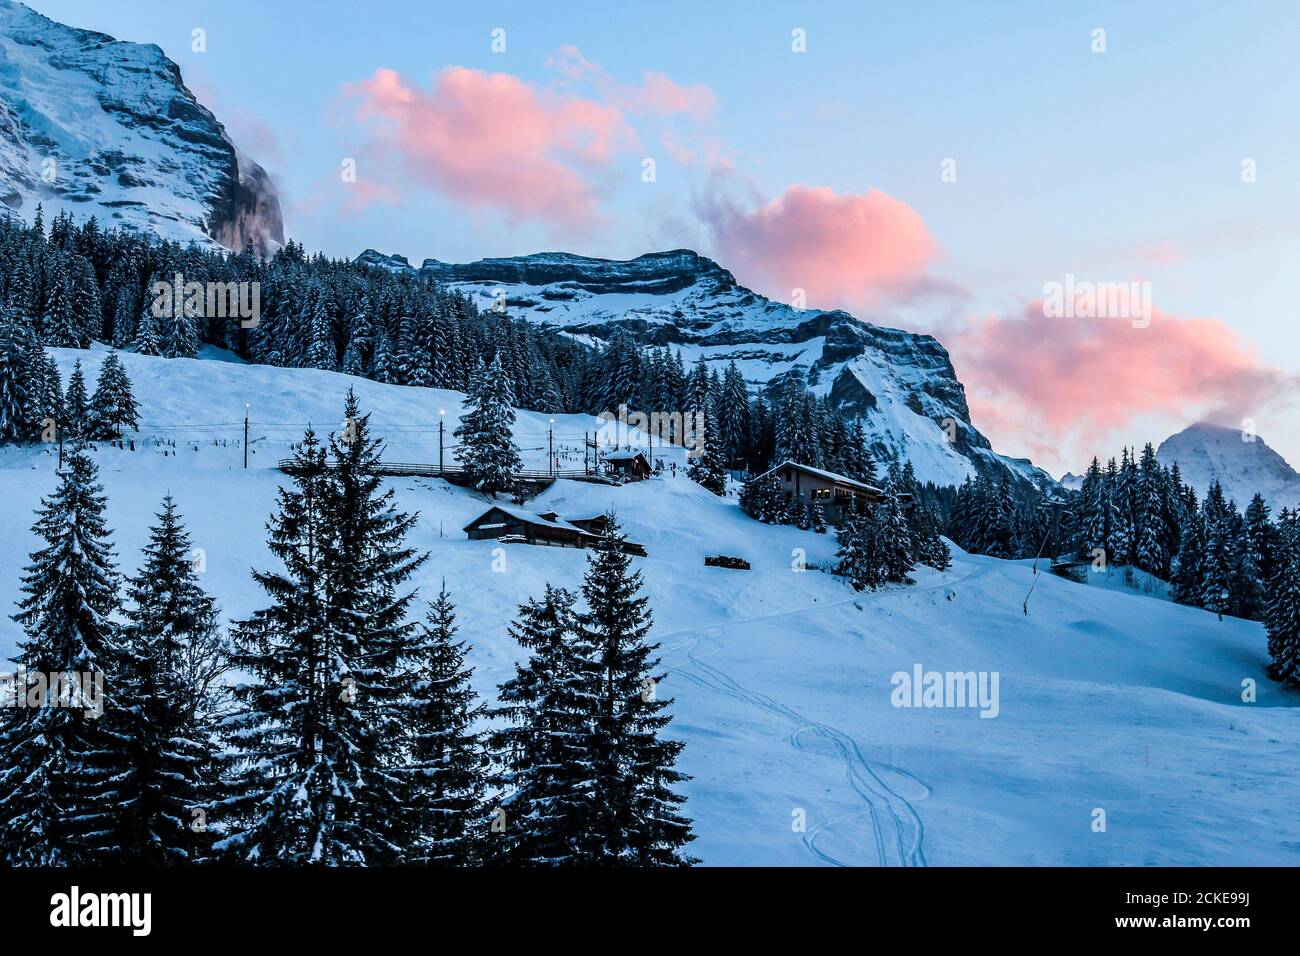 The Alpine region of Switzerland, conventionally referred to as the Swiss Alps. Stock Photo